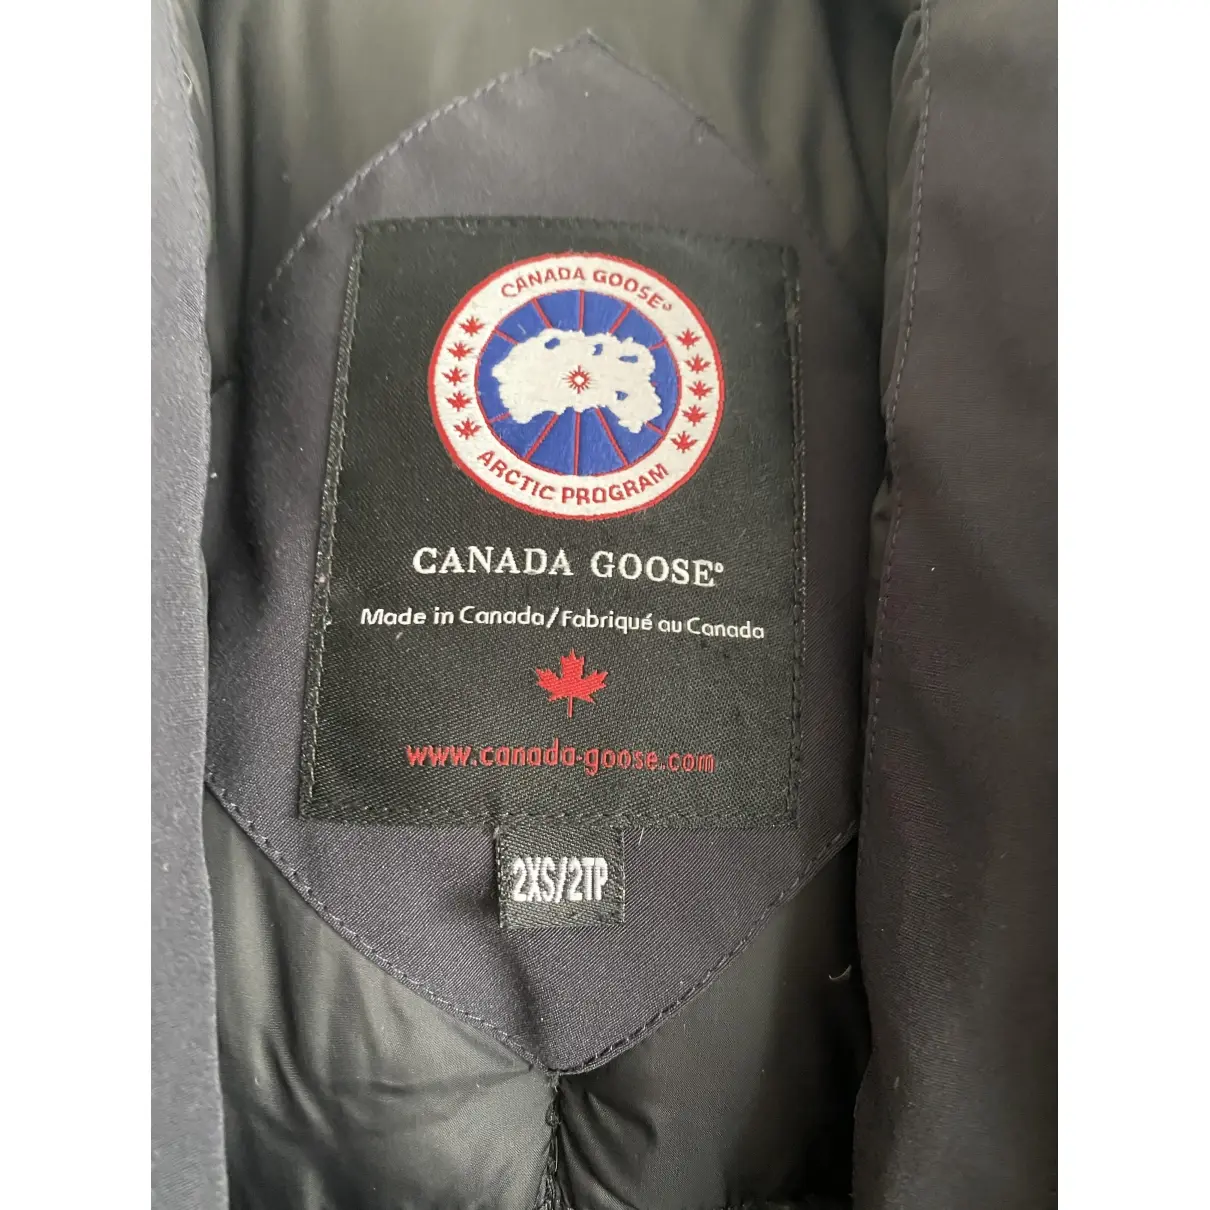 Buy Canada Goose Navy Polyester Coat Expedition online